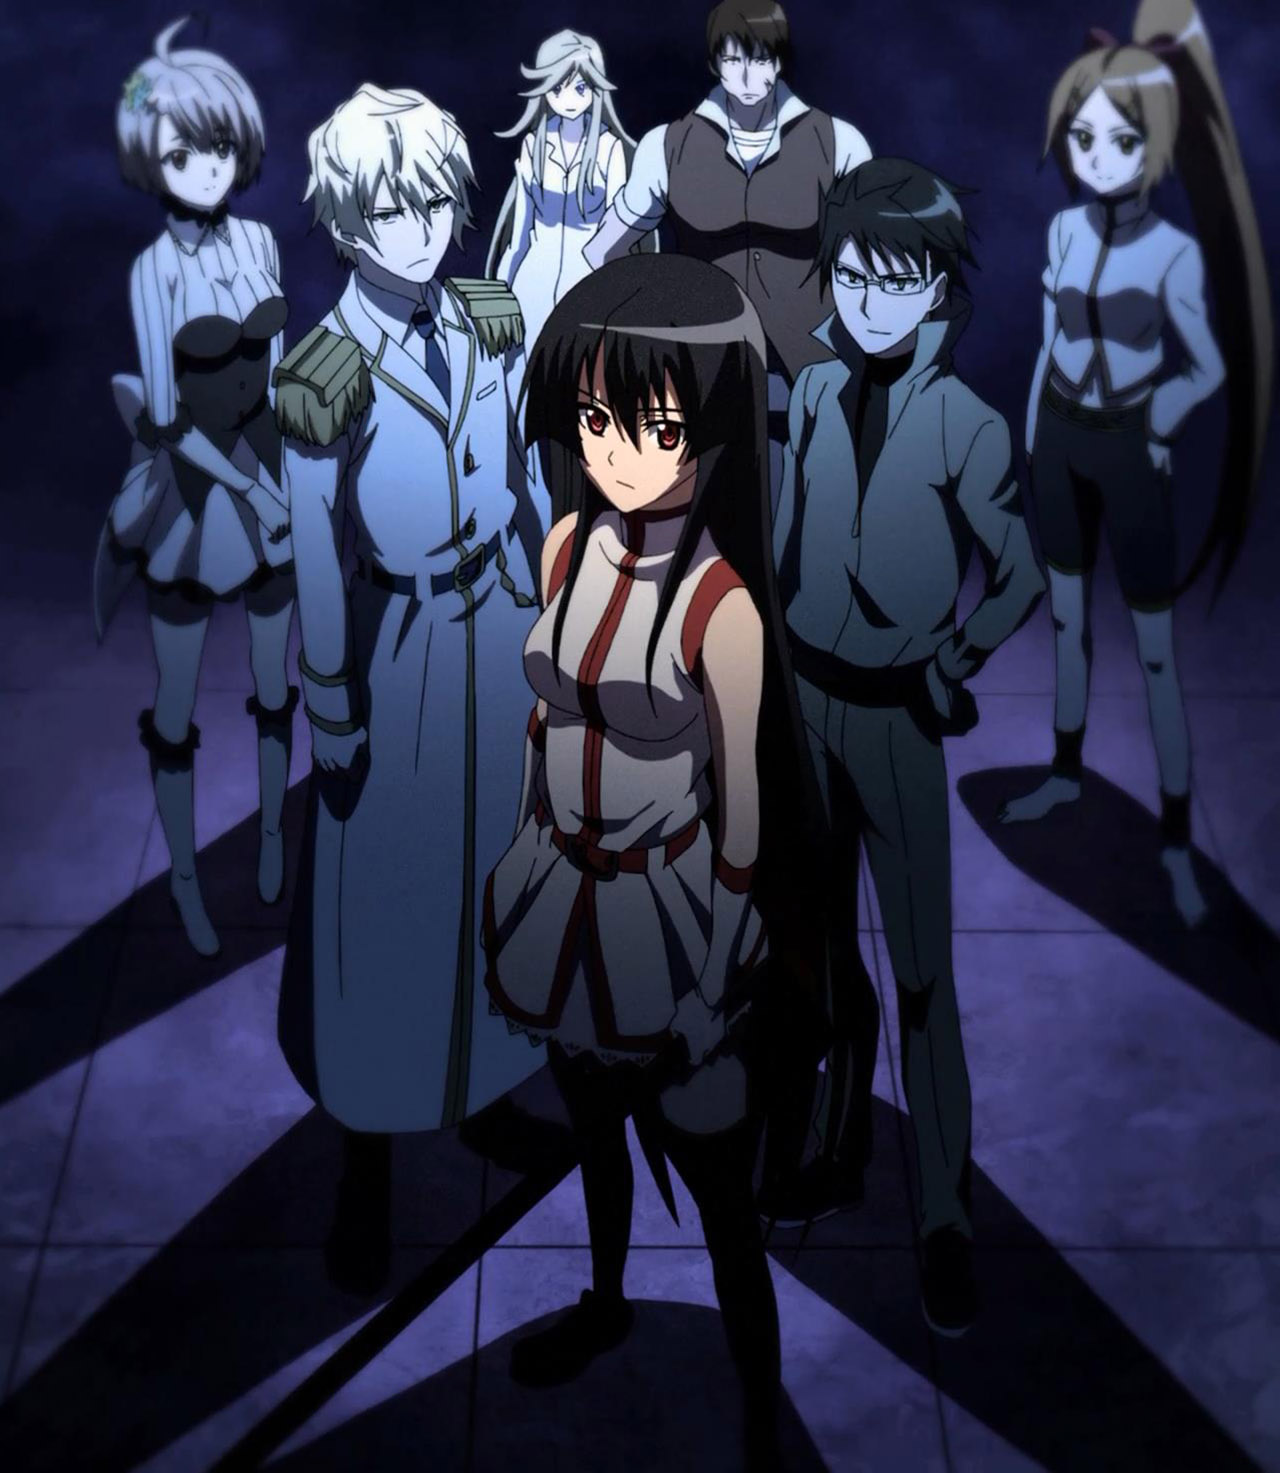 Rbbtrend Anime on X: Akame Ga Kill Season 2 Update: Will it Release in  2022? #rbbtrend #anime #news  / X